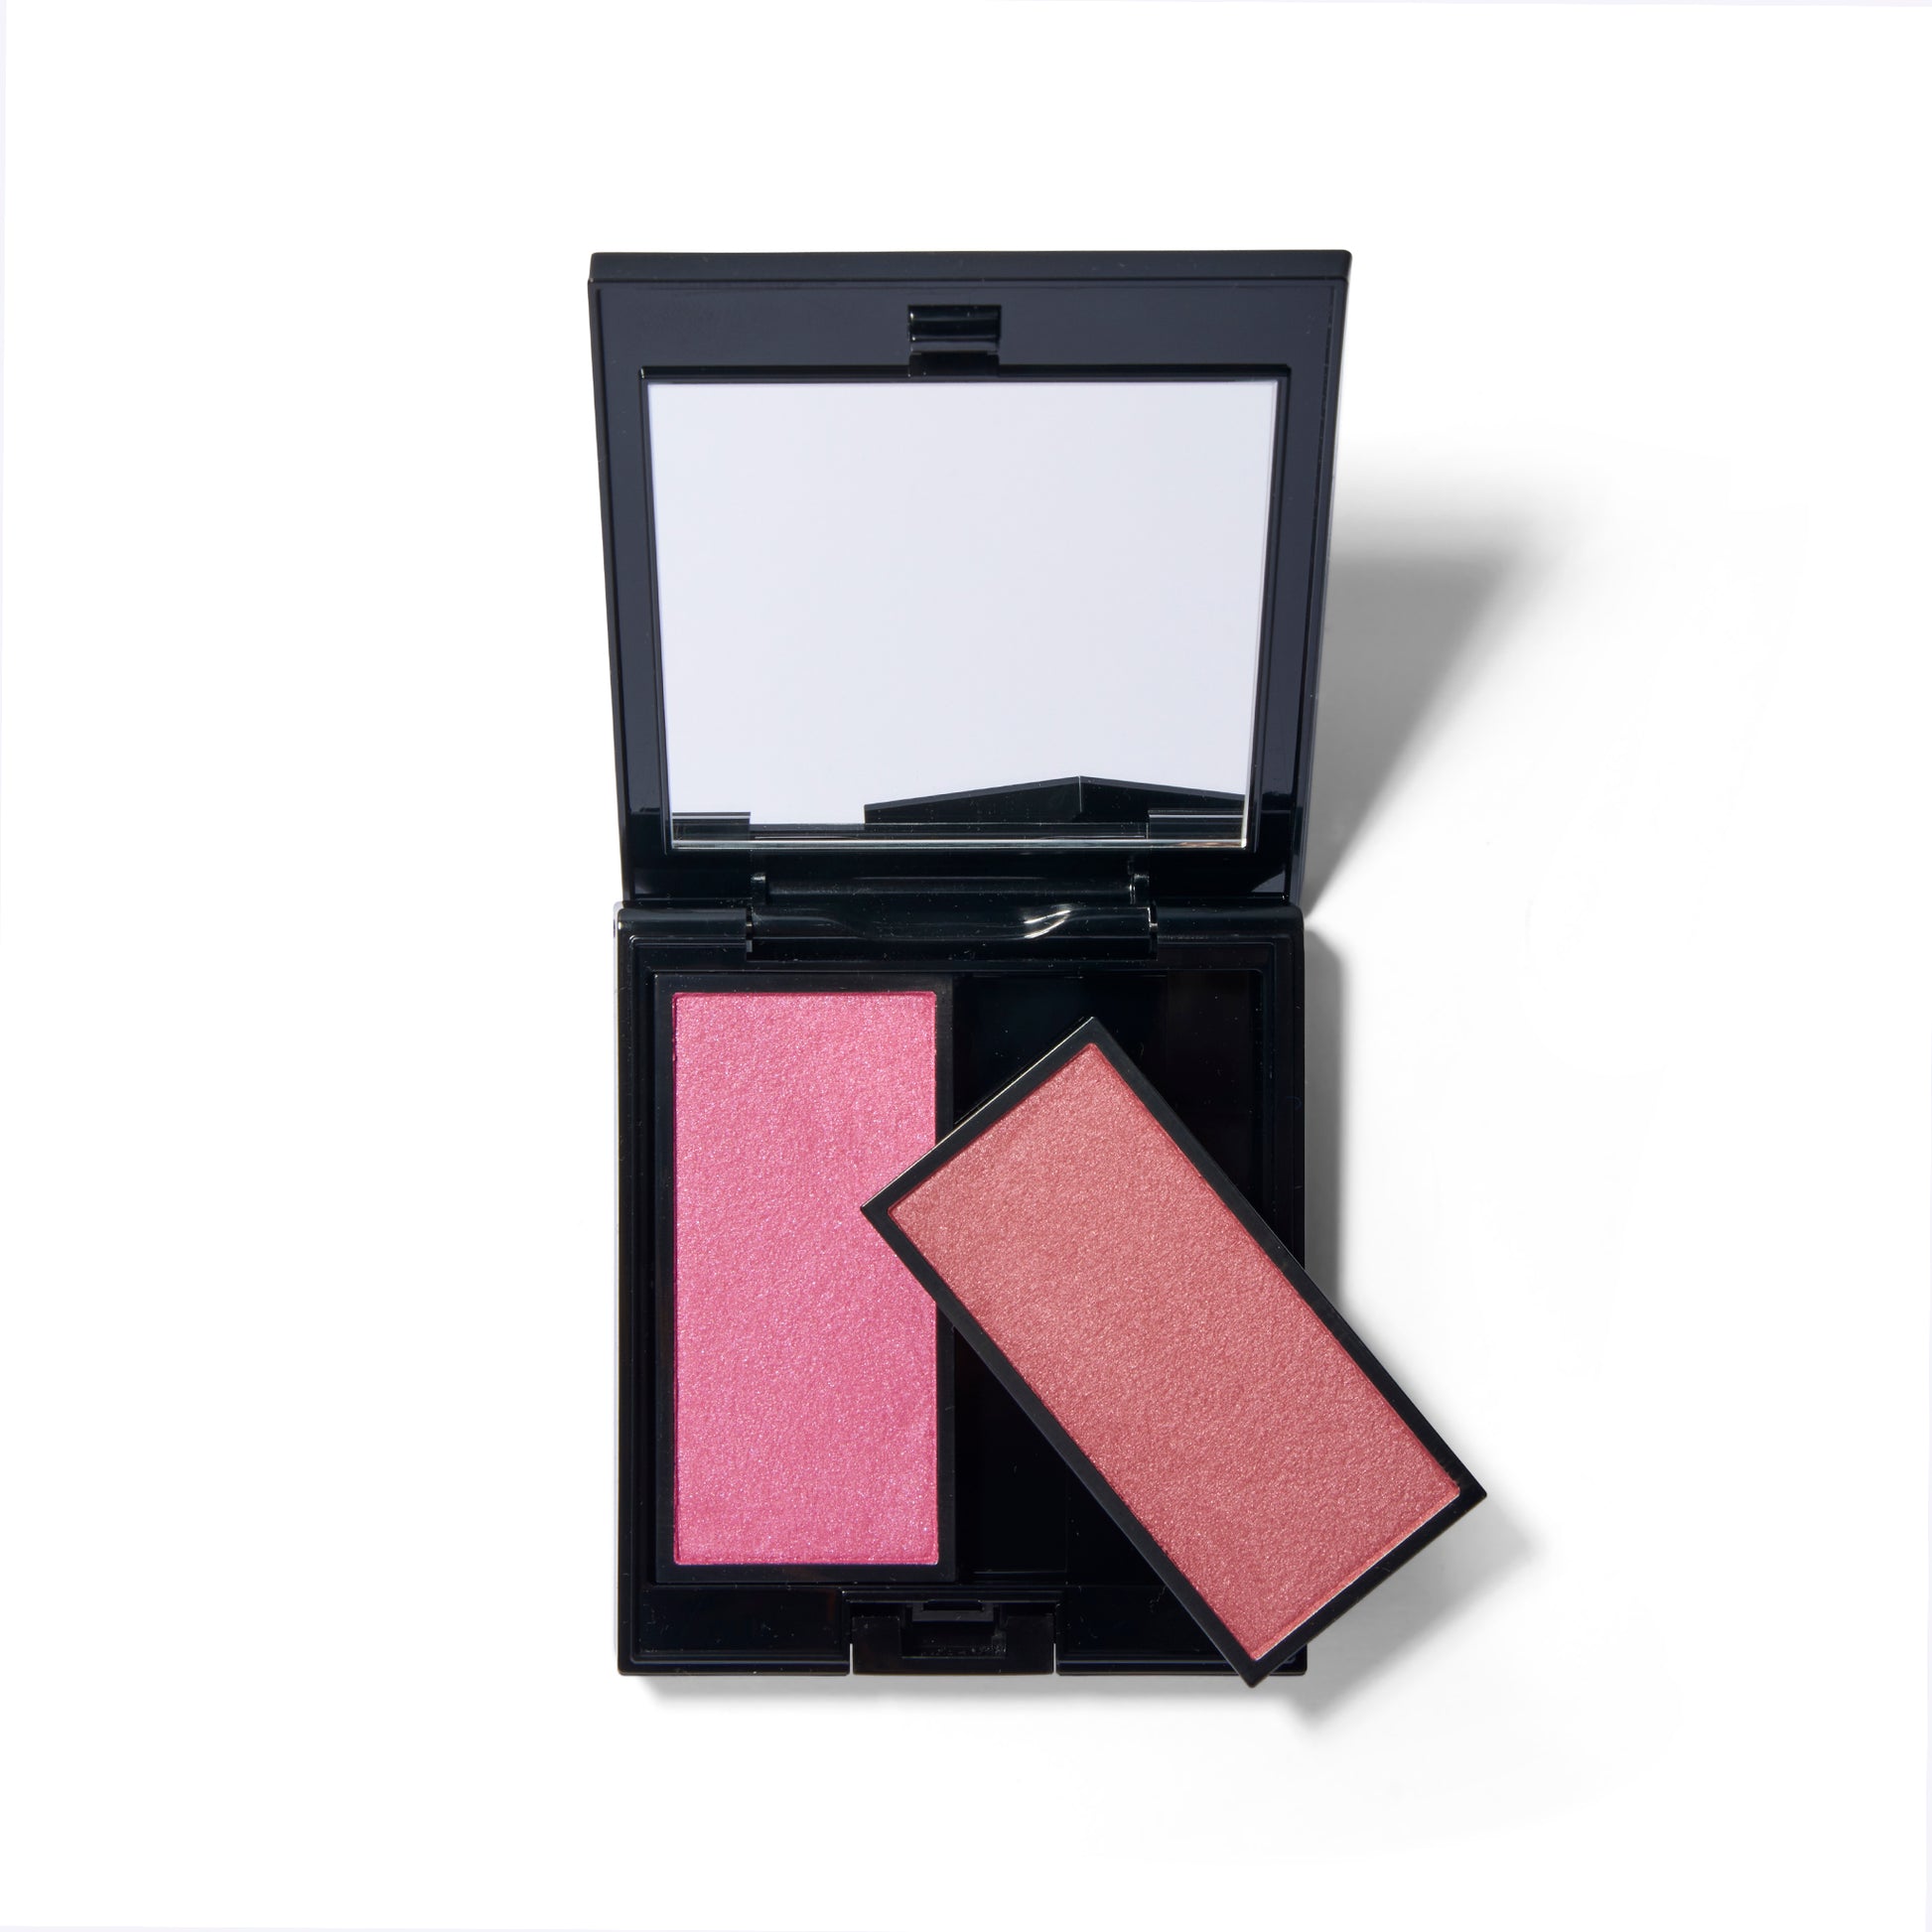 The black Compact Case I, open with the mirror showing. There are two shades of blush in the image, one inserted into the case and one pan of blush is resting on top of the other at an angle showing that the blush pans pop out. 